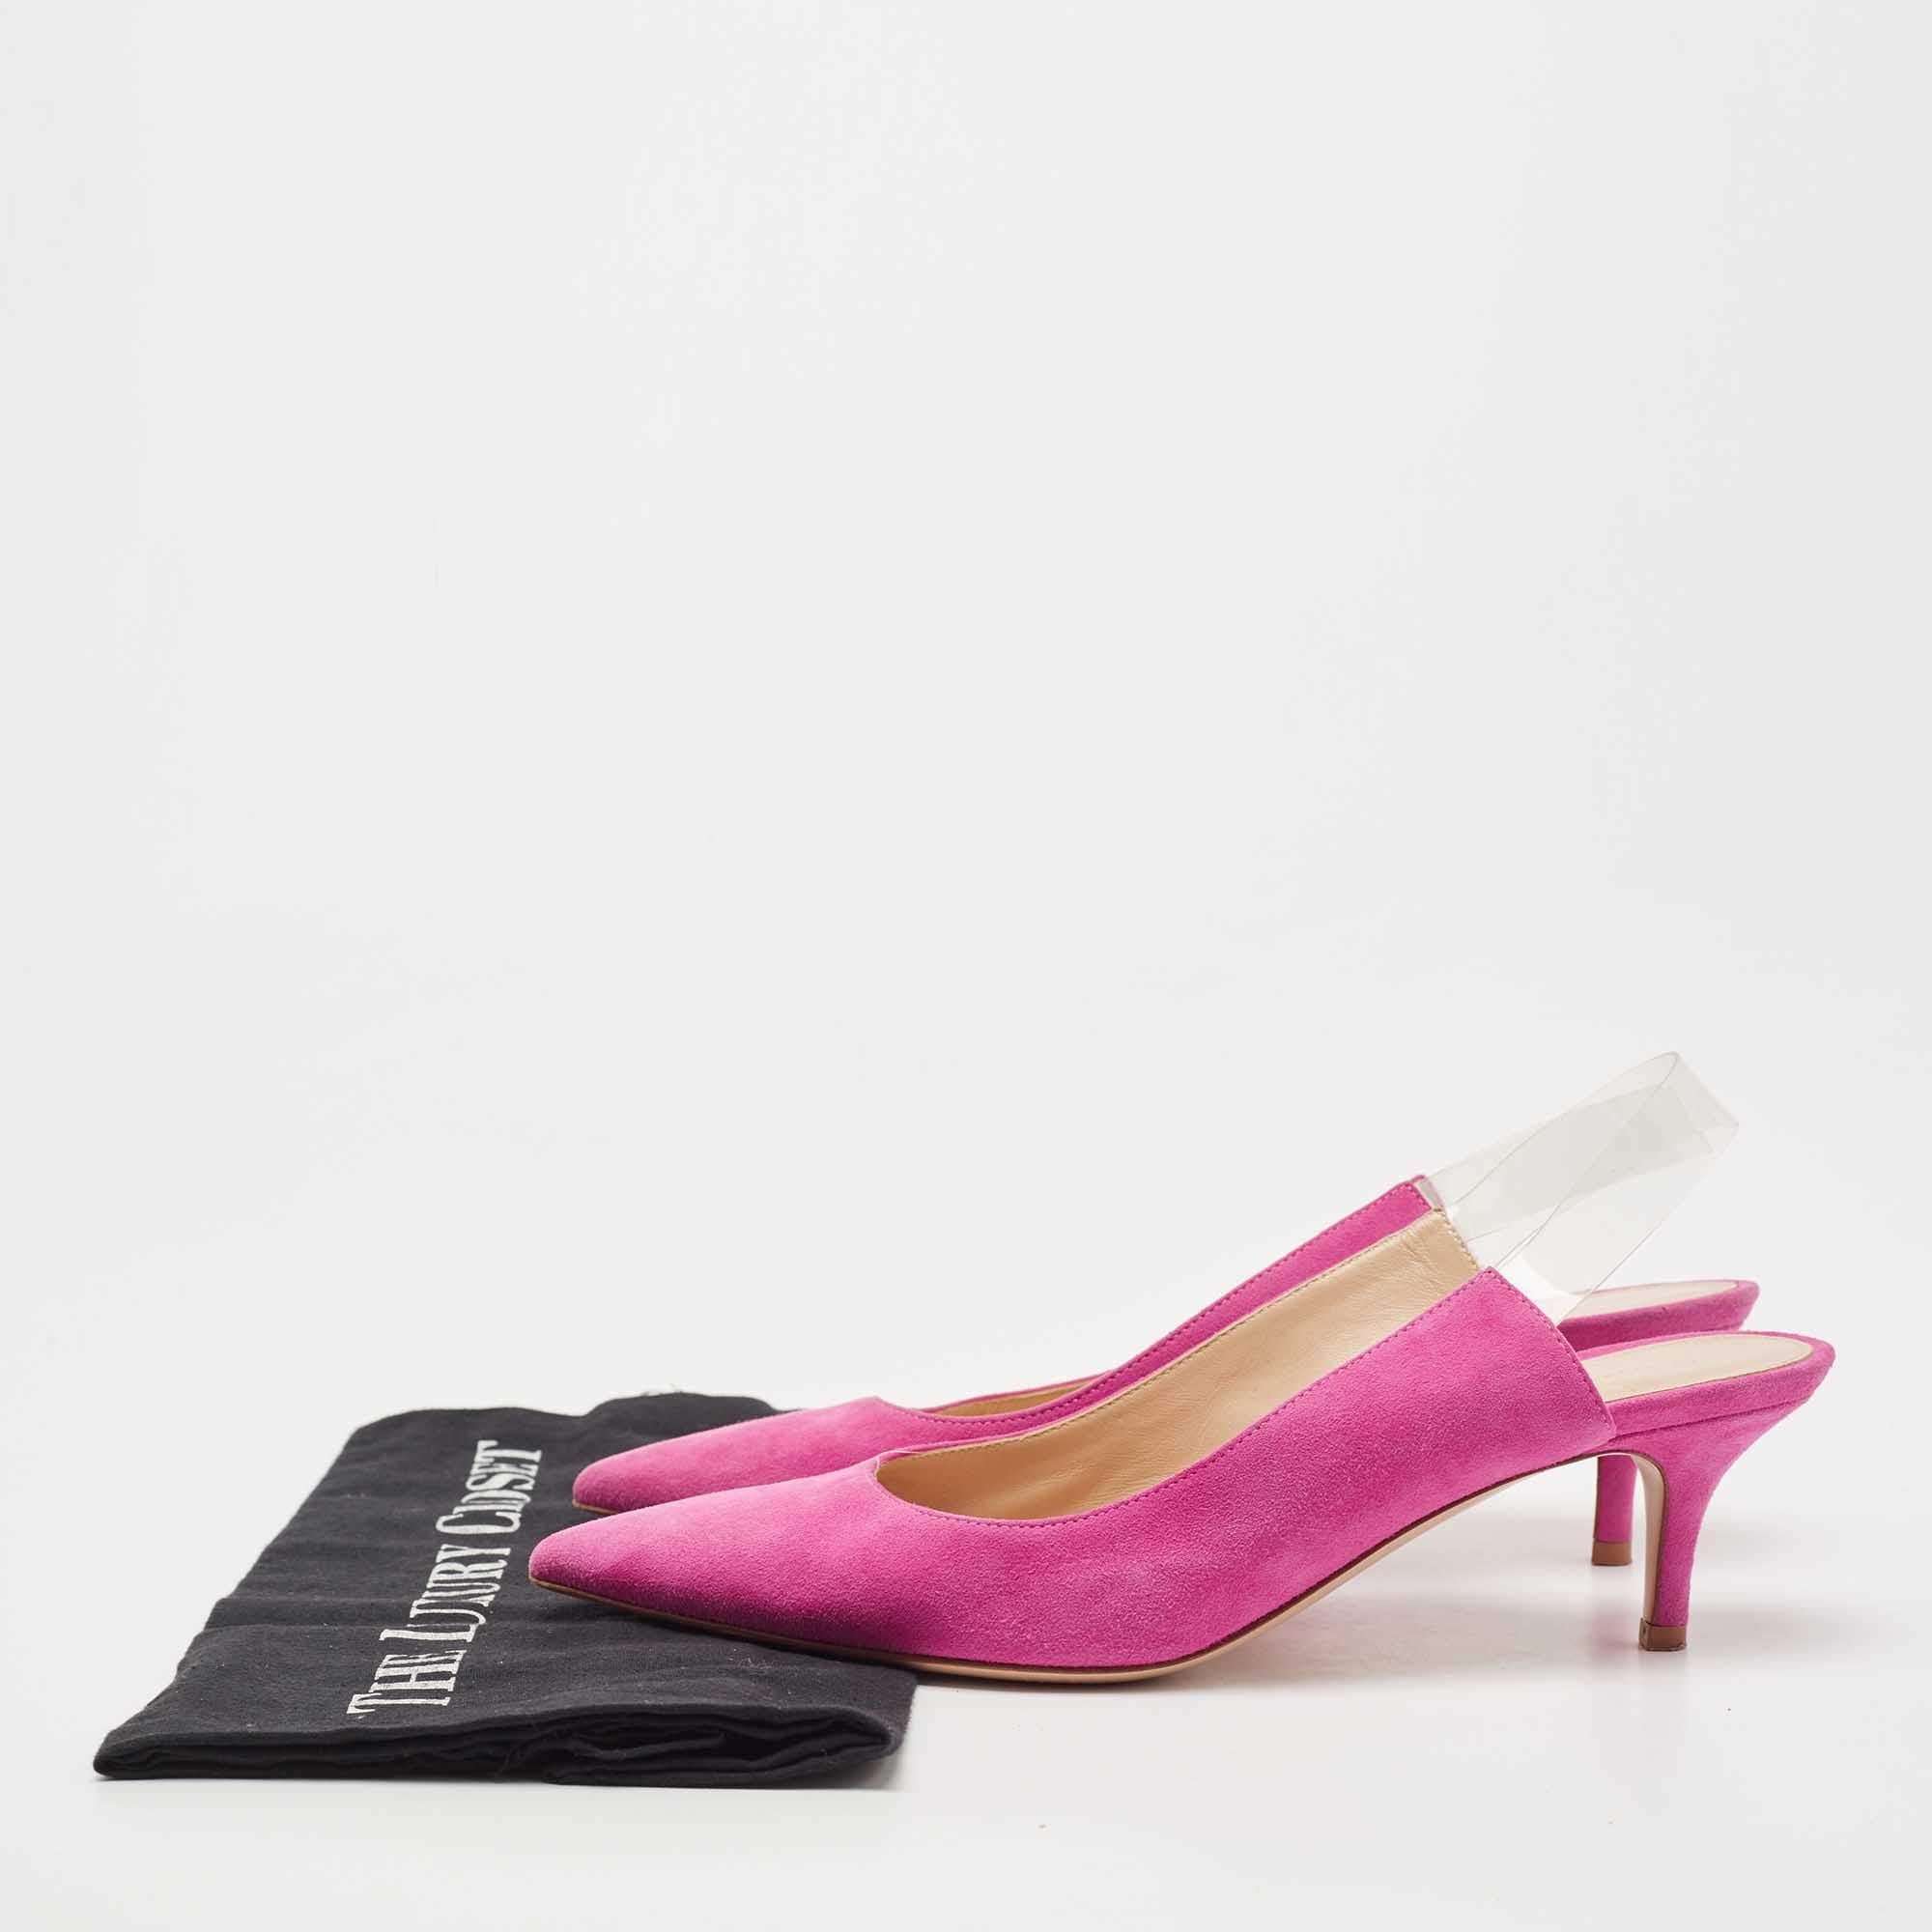 Gianvito Rossi Pink Suede and PVC Slingback Pumps Size 37.5 3